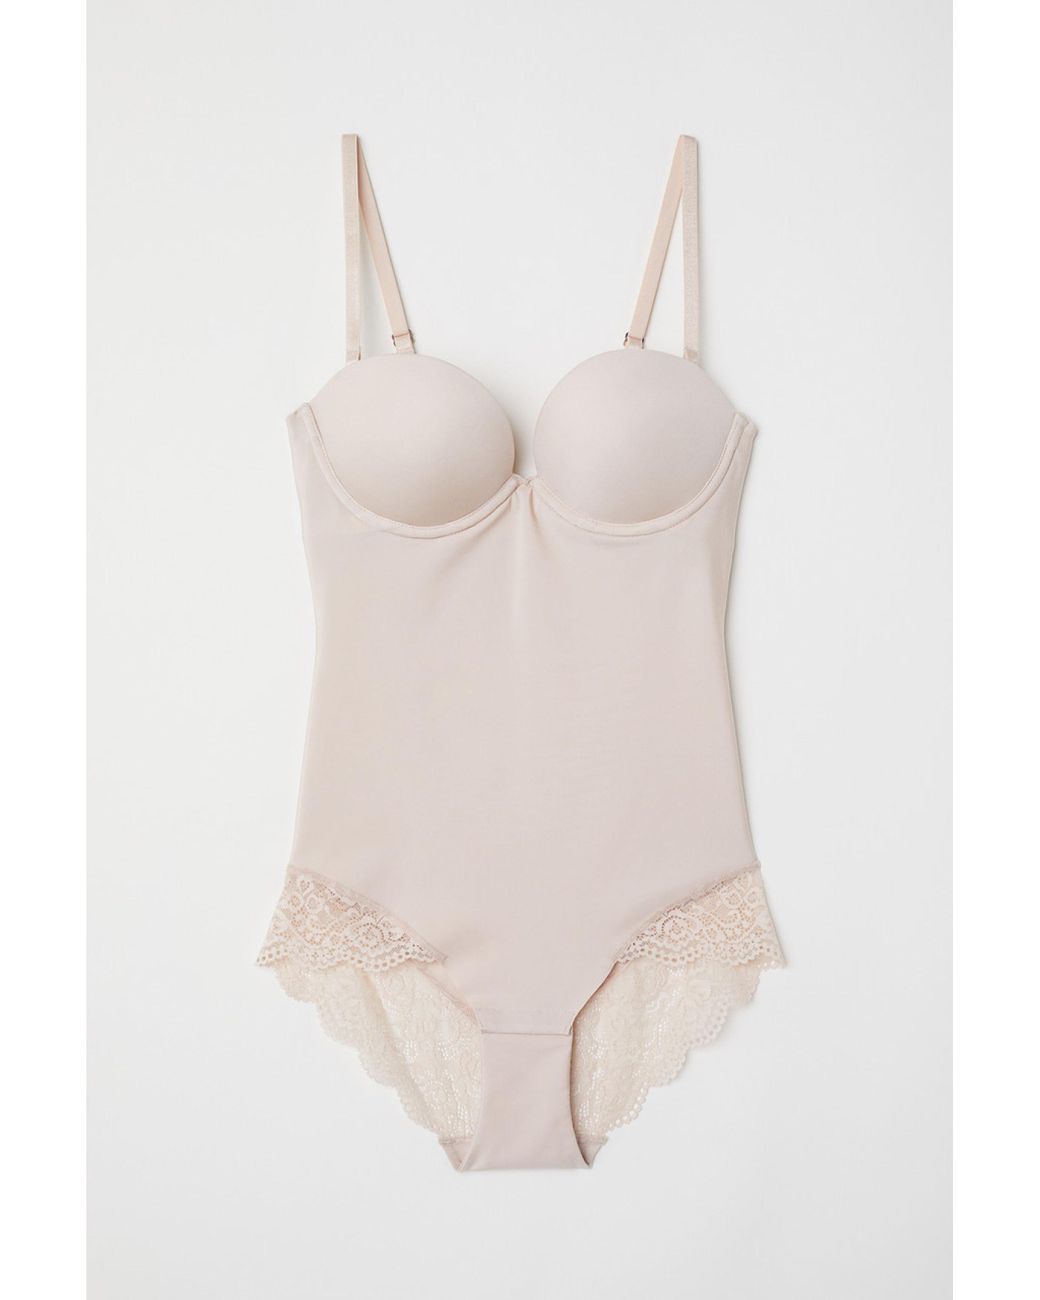 H&M Synthetic Shaping Super Push-up Bodysuit in Light Beige (Natural) | Lyst